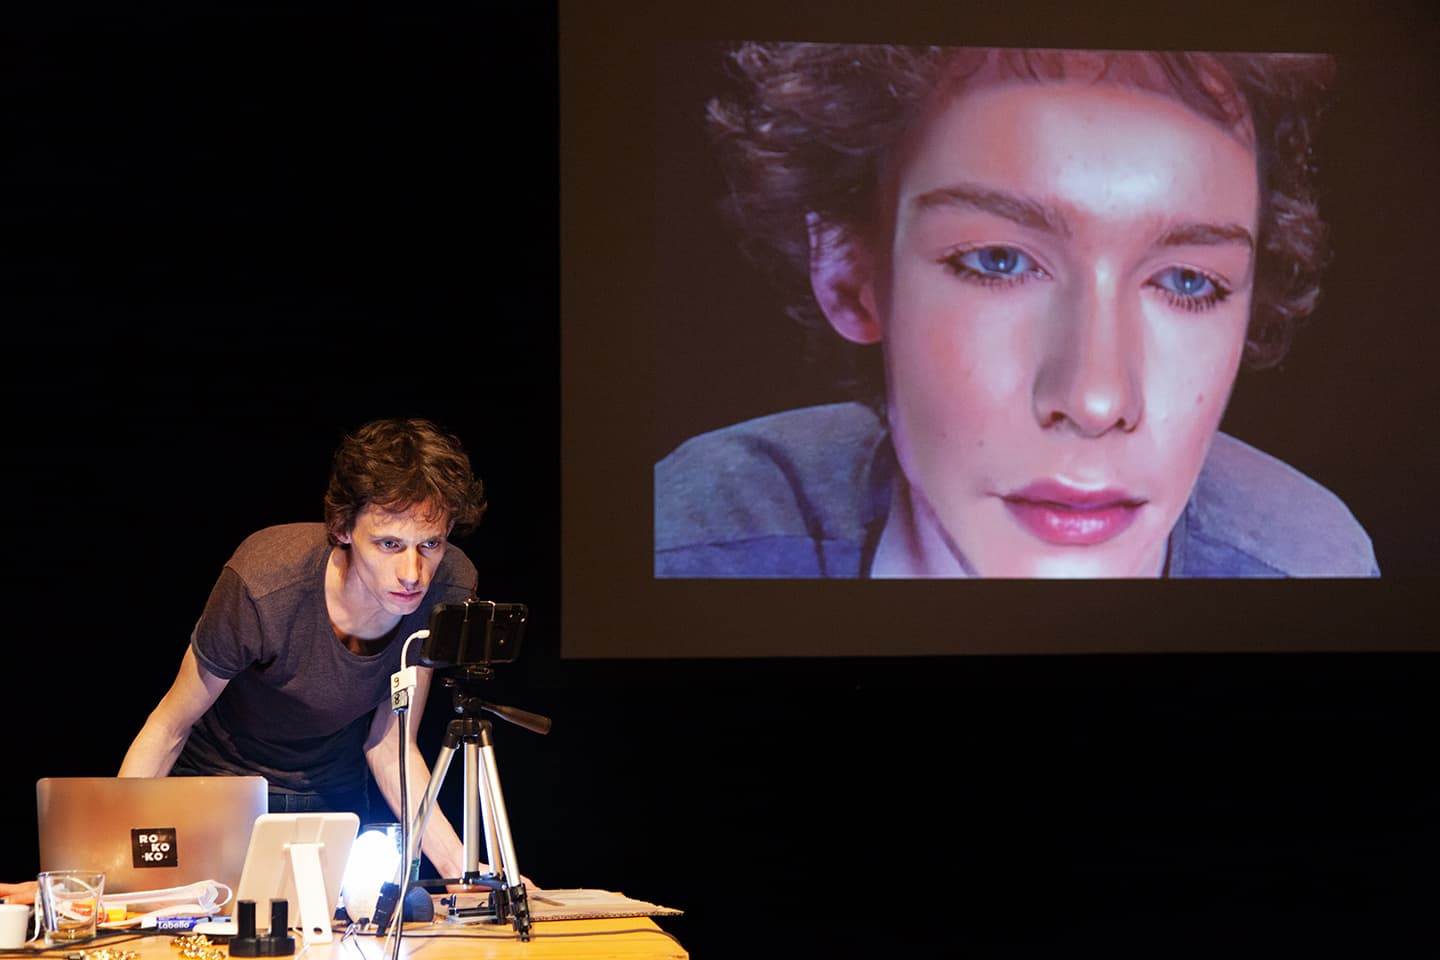 Simon Senn with laptop, microphone and audiovisual equipment at desk. Face of woman, digitally superimposed, on large screen behind him, in the performance Be Arielle F